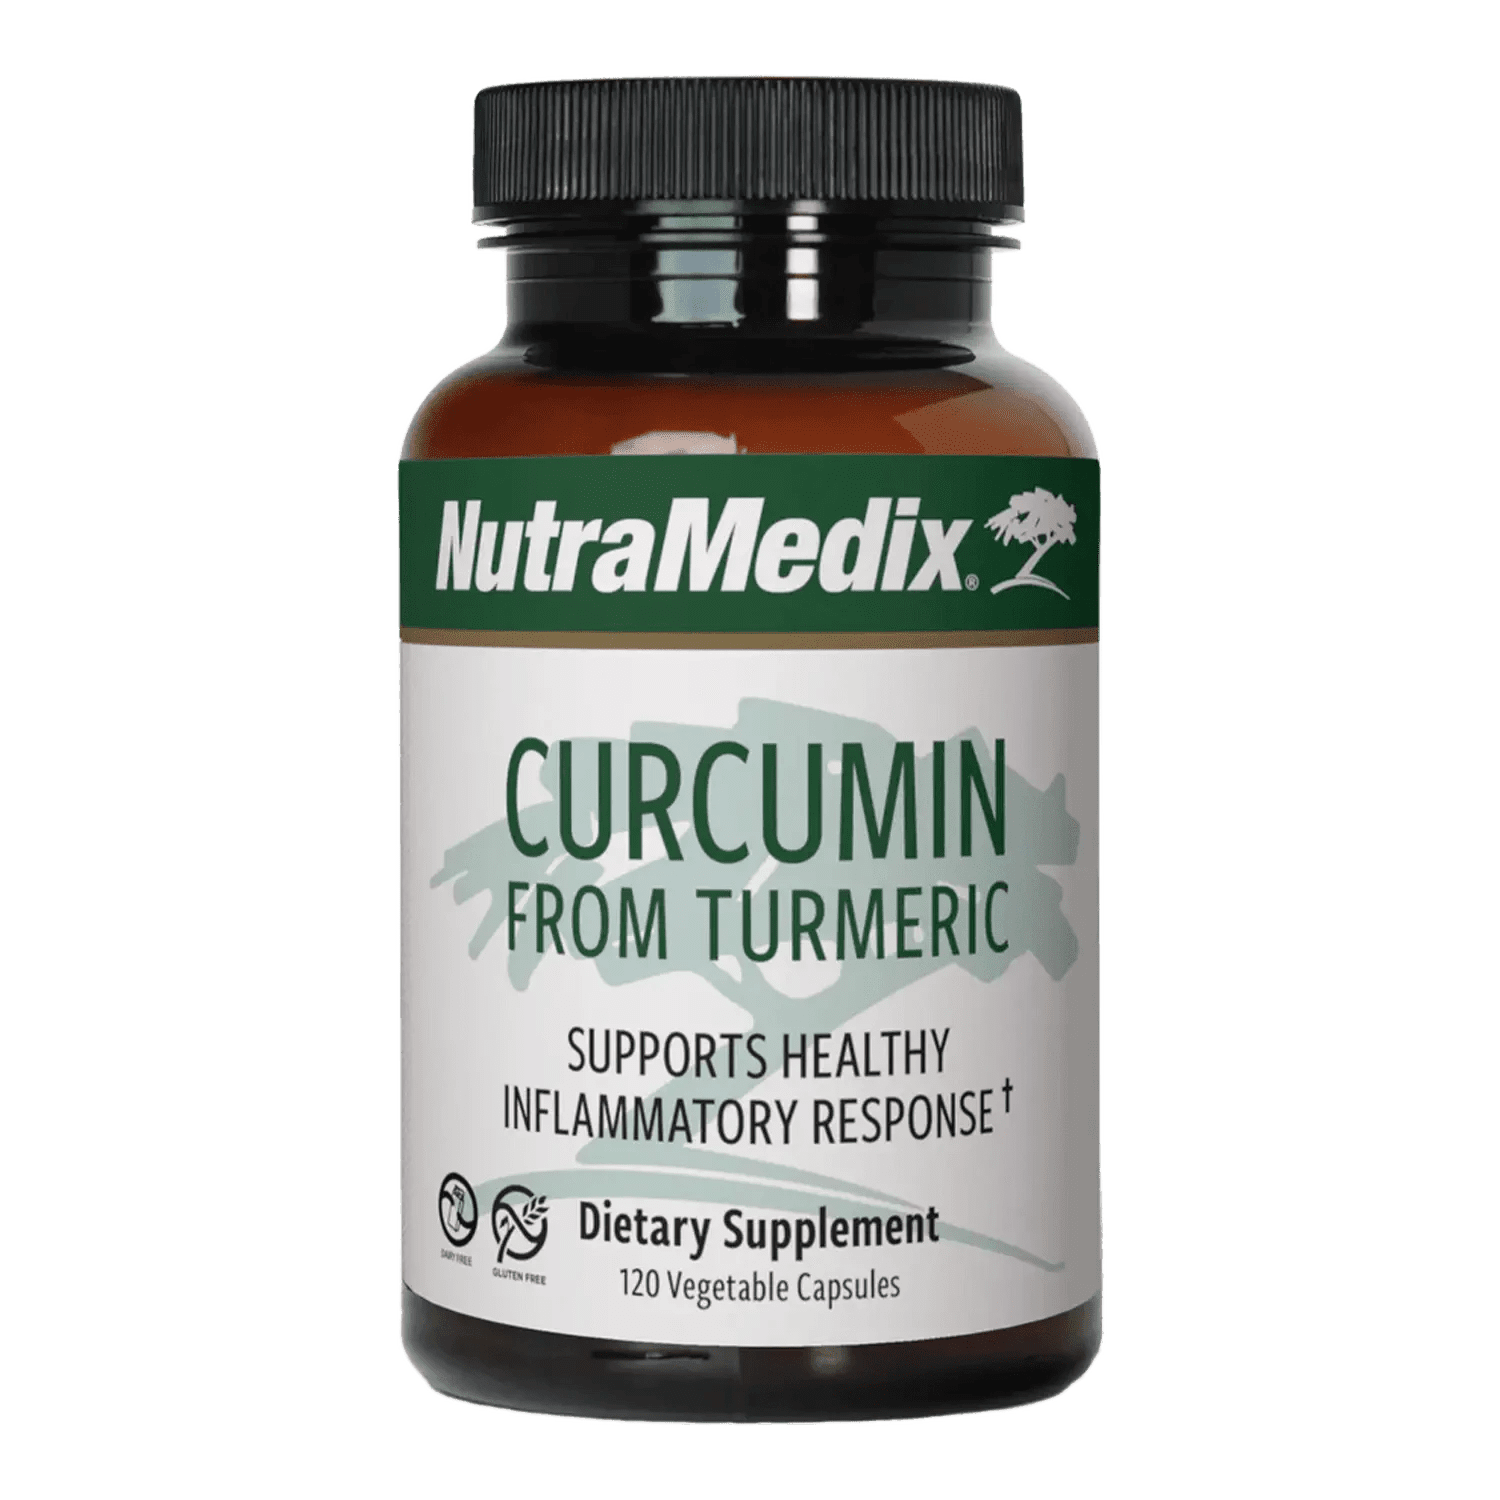 Curcumin joint supplement - 120 Vegetable Capsules